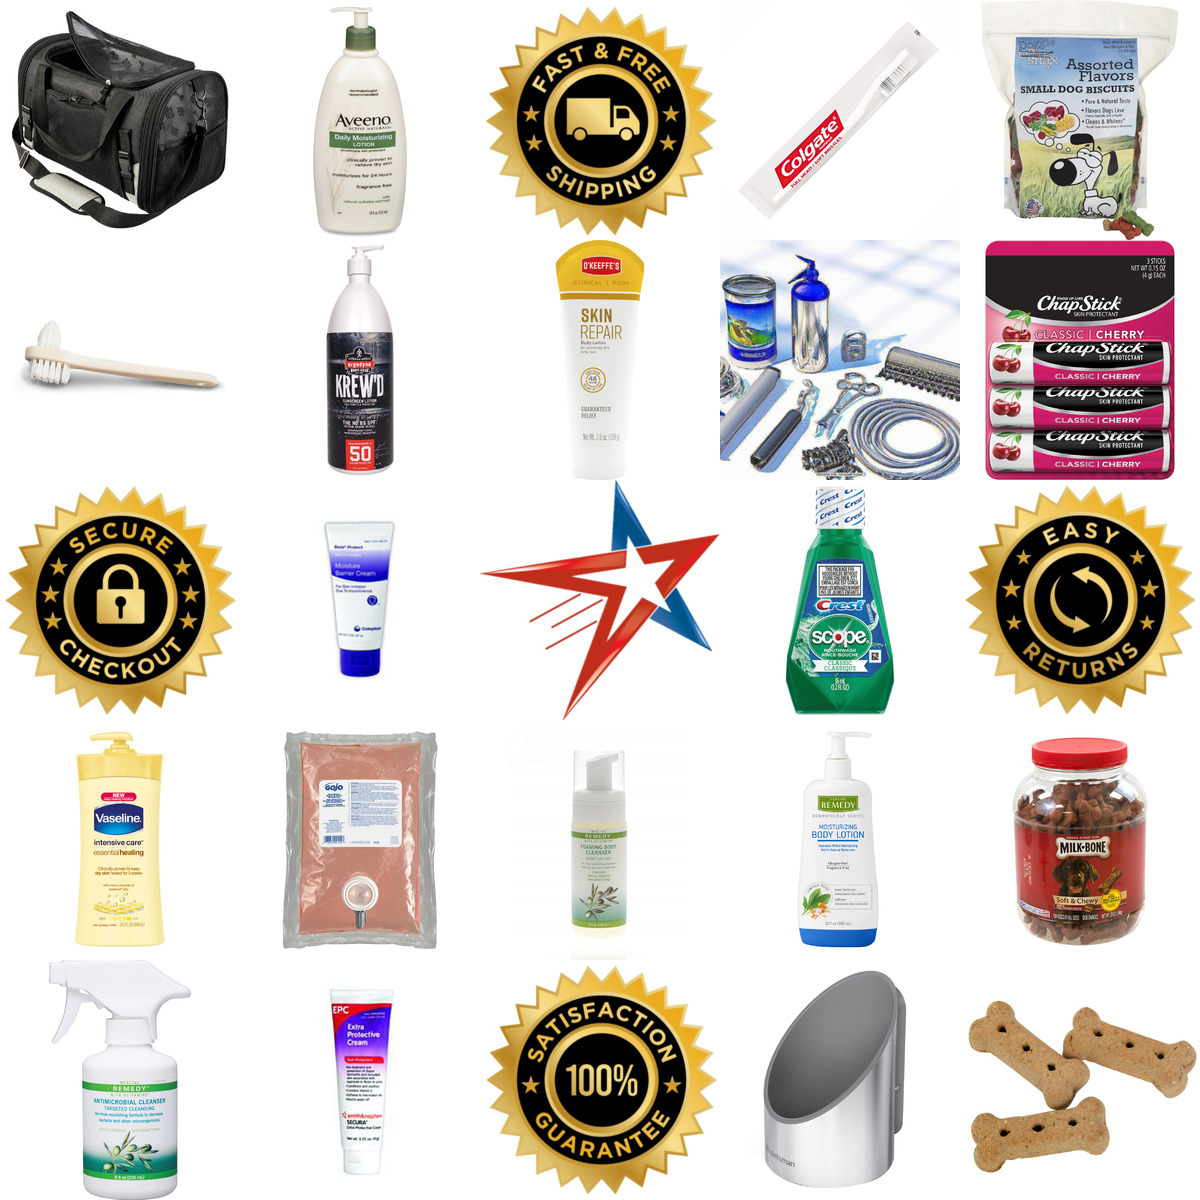 A selection of Personal Care products on GoVets